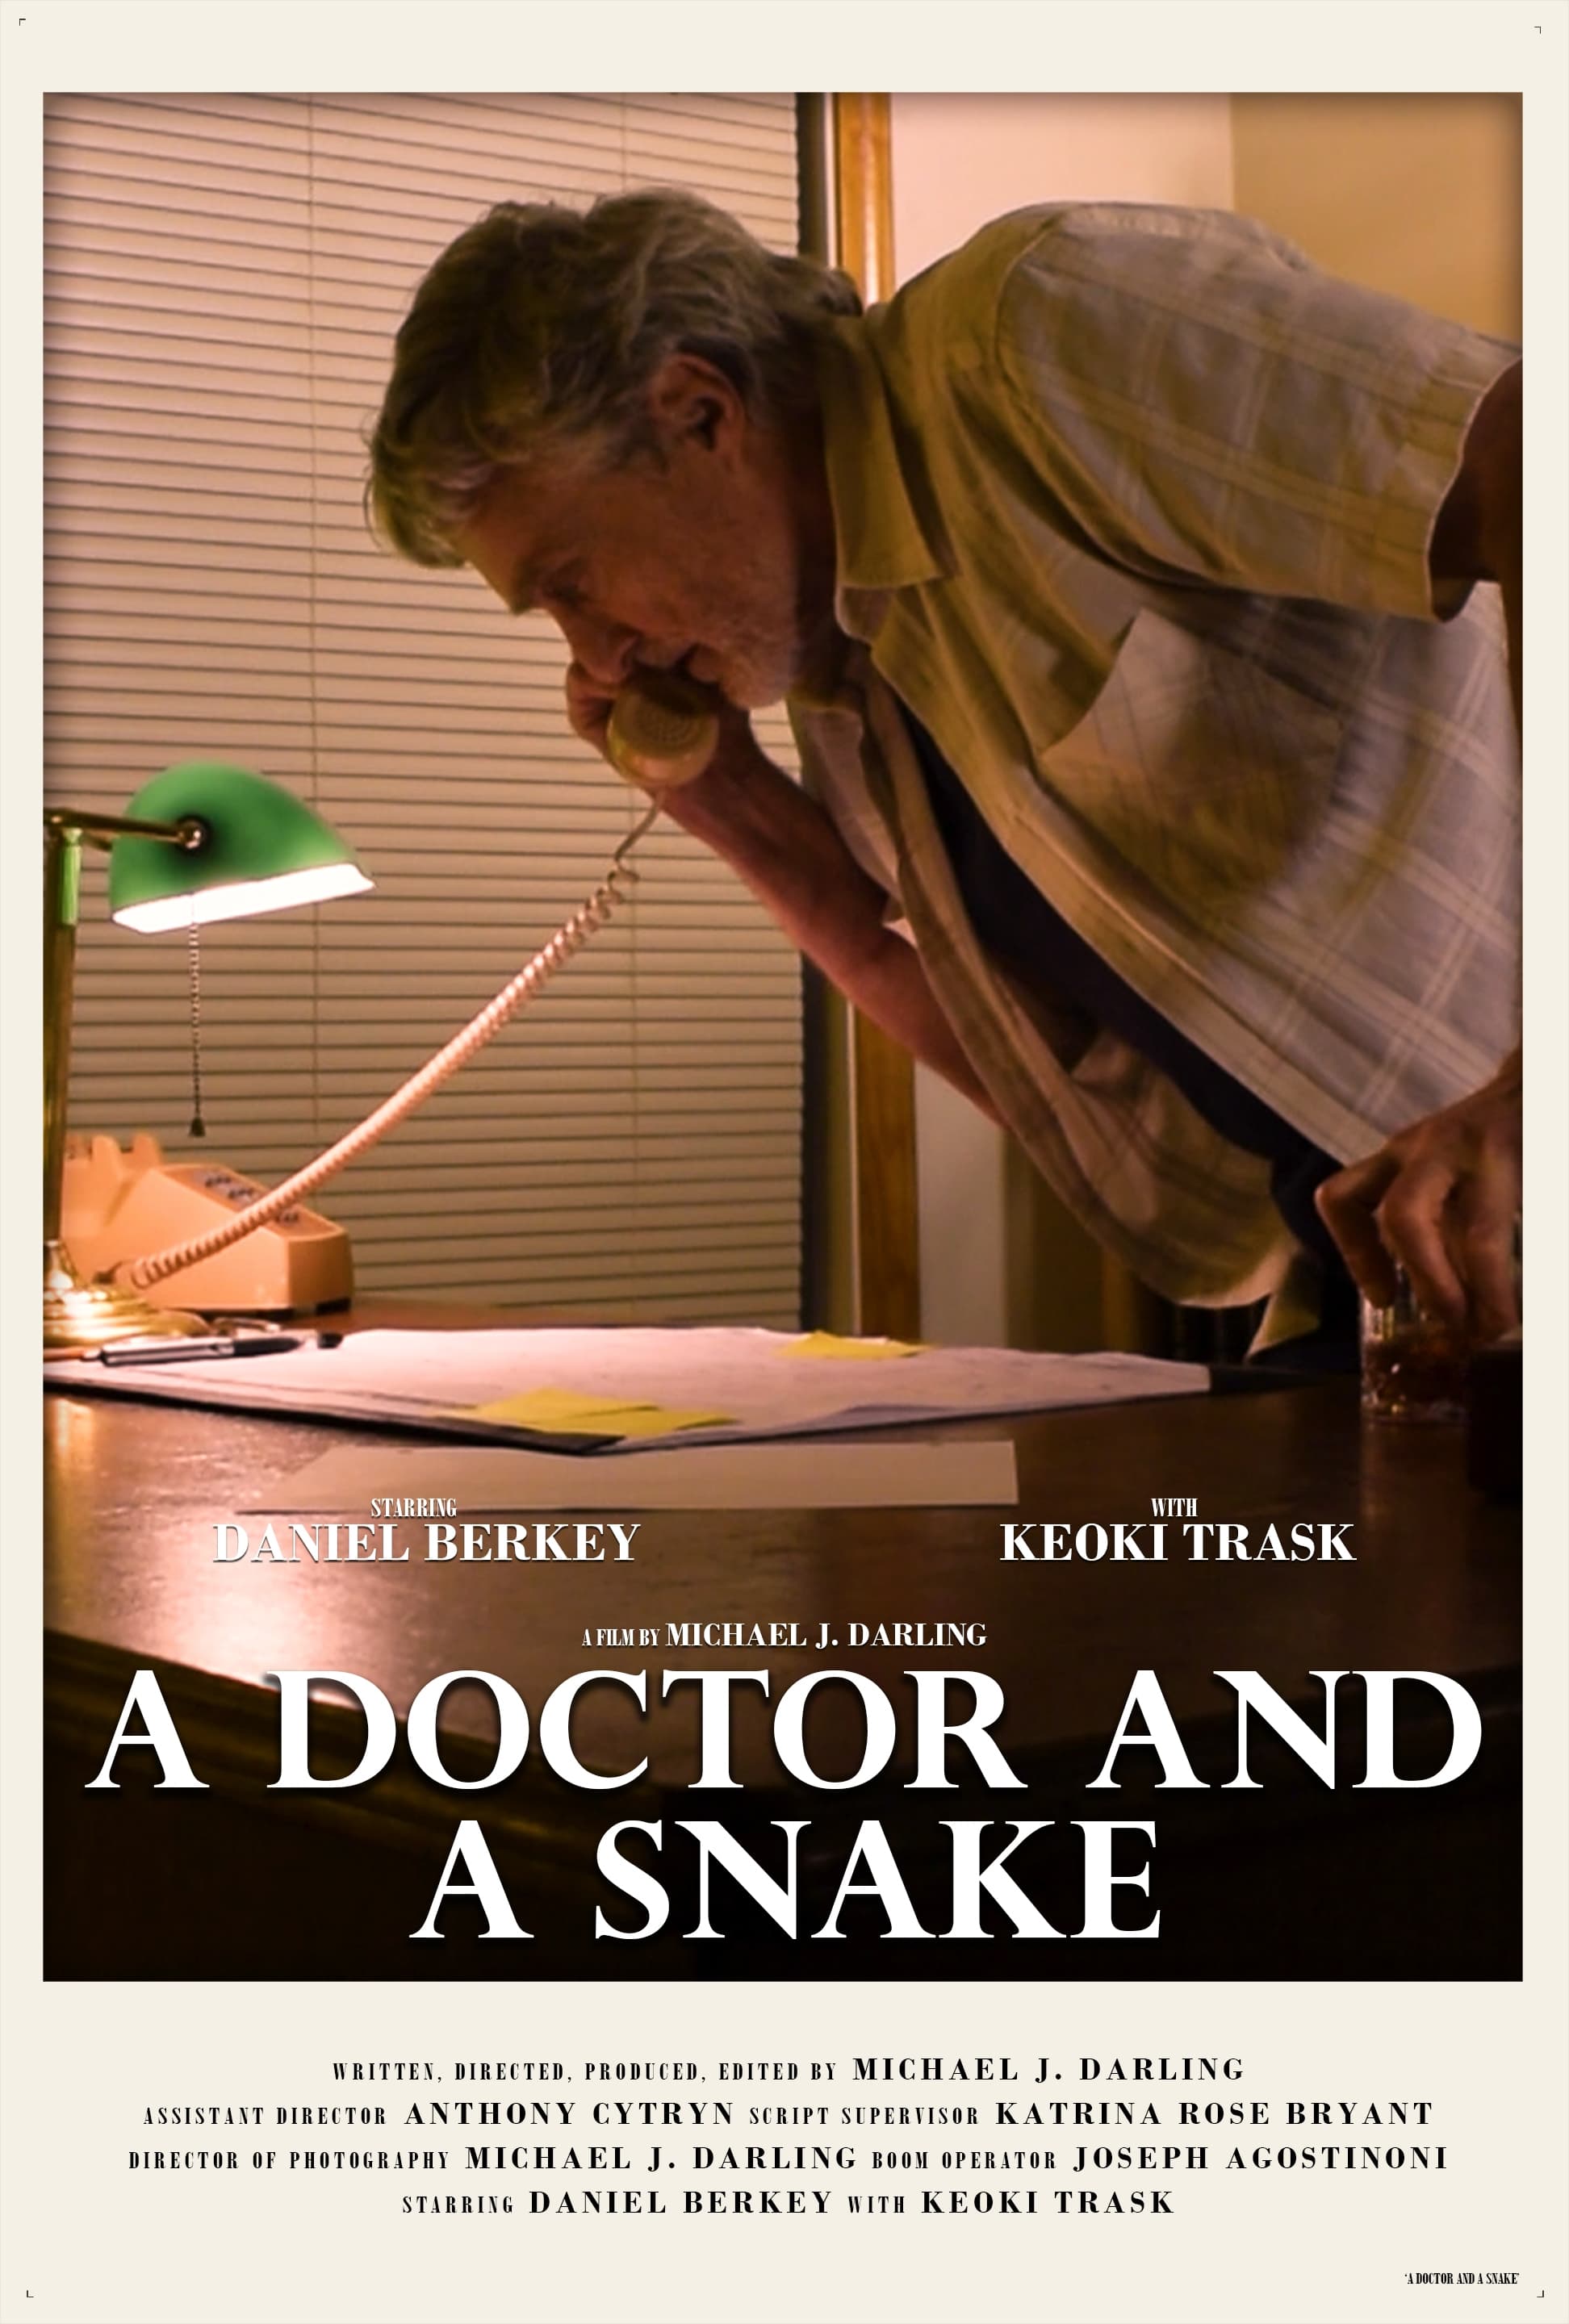 A Doctor and A Snake